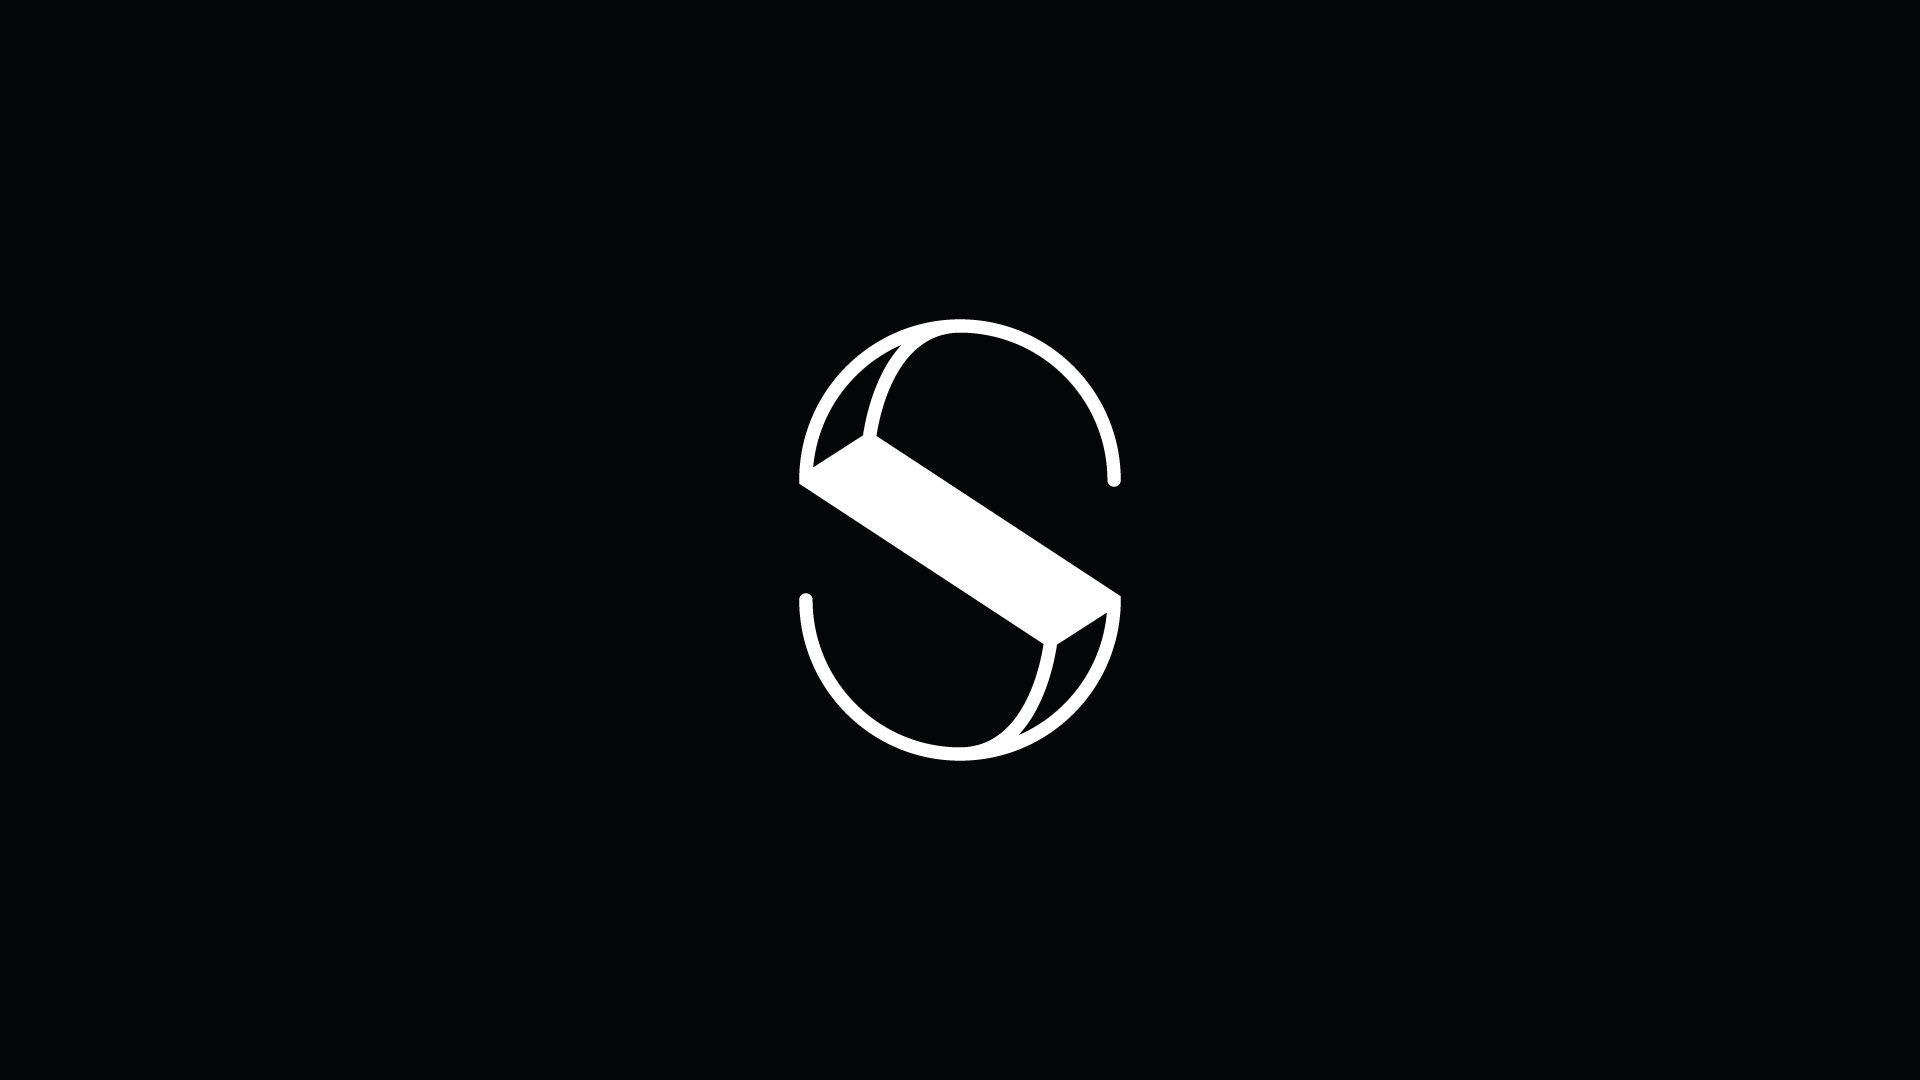 S Logo Wallpapers - Top Free S Logo Backgrounds - WallpaperAccess